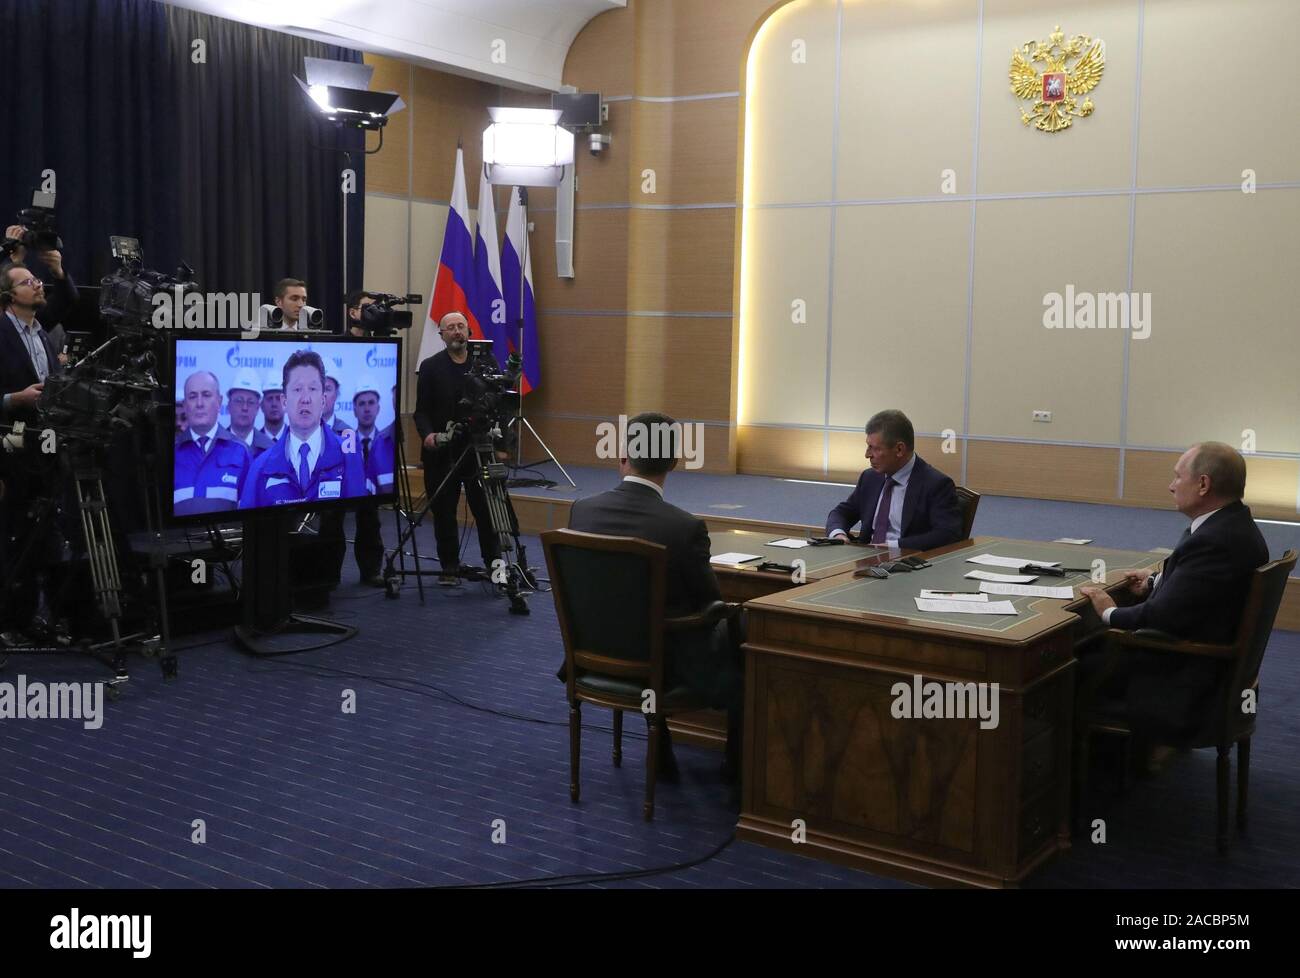 Moscow, Russia. 02nd Dec, 2019. Russian President Vladimir Putin (1st R), Russian Energy Minister Alexander Novak (L) and Deputy Prime Minister Dmitry Kozak (2nd R) watch the launching ceremony of the China-Russia east-route natural gas pipeline via teleconference in Sochi, Russia, Dec. 2, 2019. Chinese President Xi Jinping had a video call with his Russian counterpart Vladimir Putin Monday afternoon, as the two heads of state jointly witnessed the launching ceremony of the China-Russia east-route natural gas pipeline. (Sputnik/Handout via Xinhua) Credit: Xinhua/Alamy Live News Stock Photo